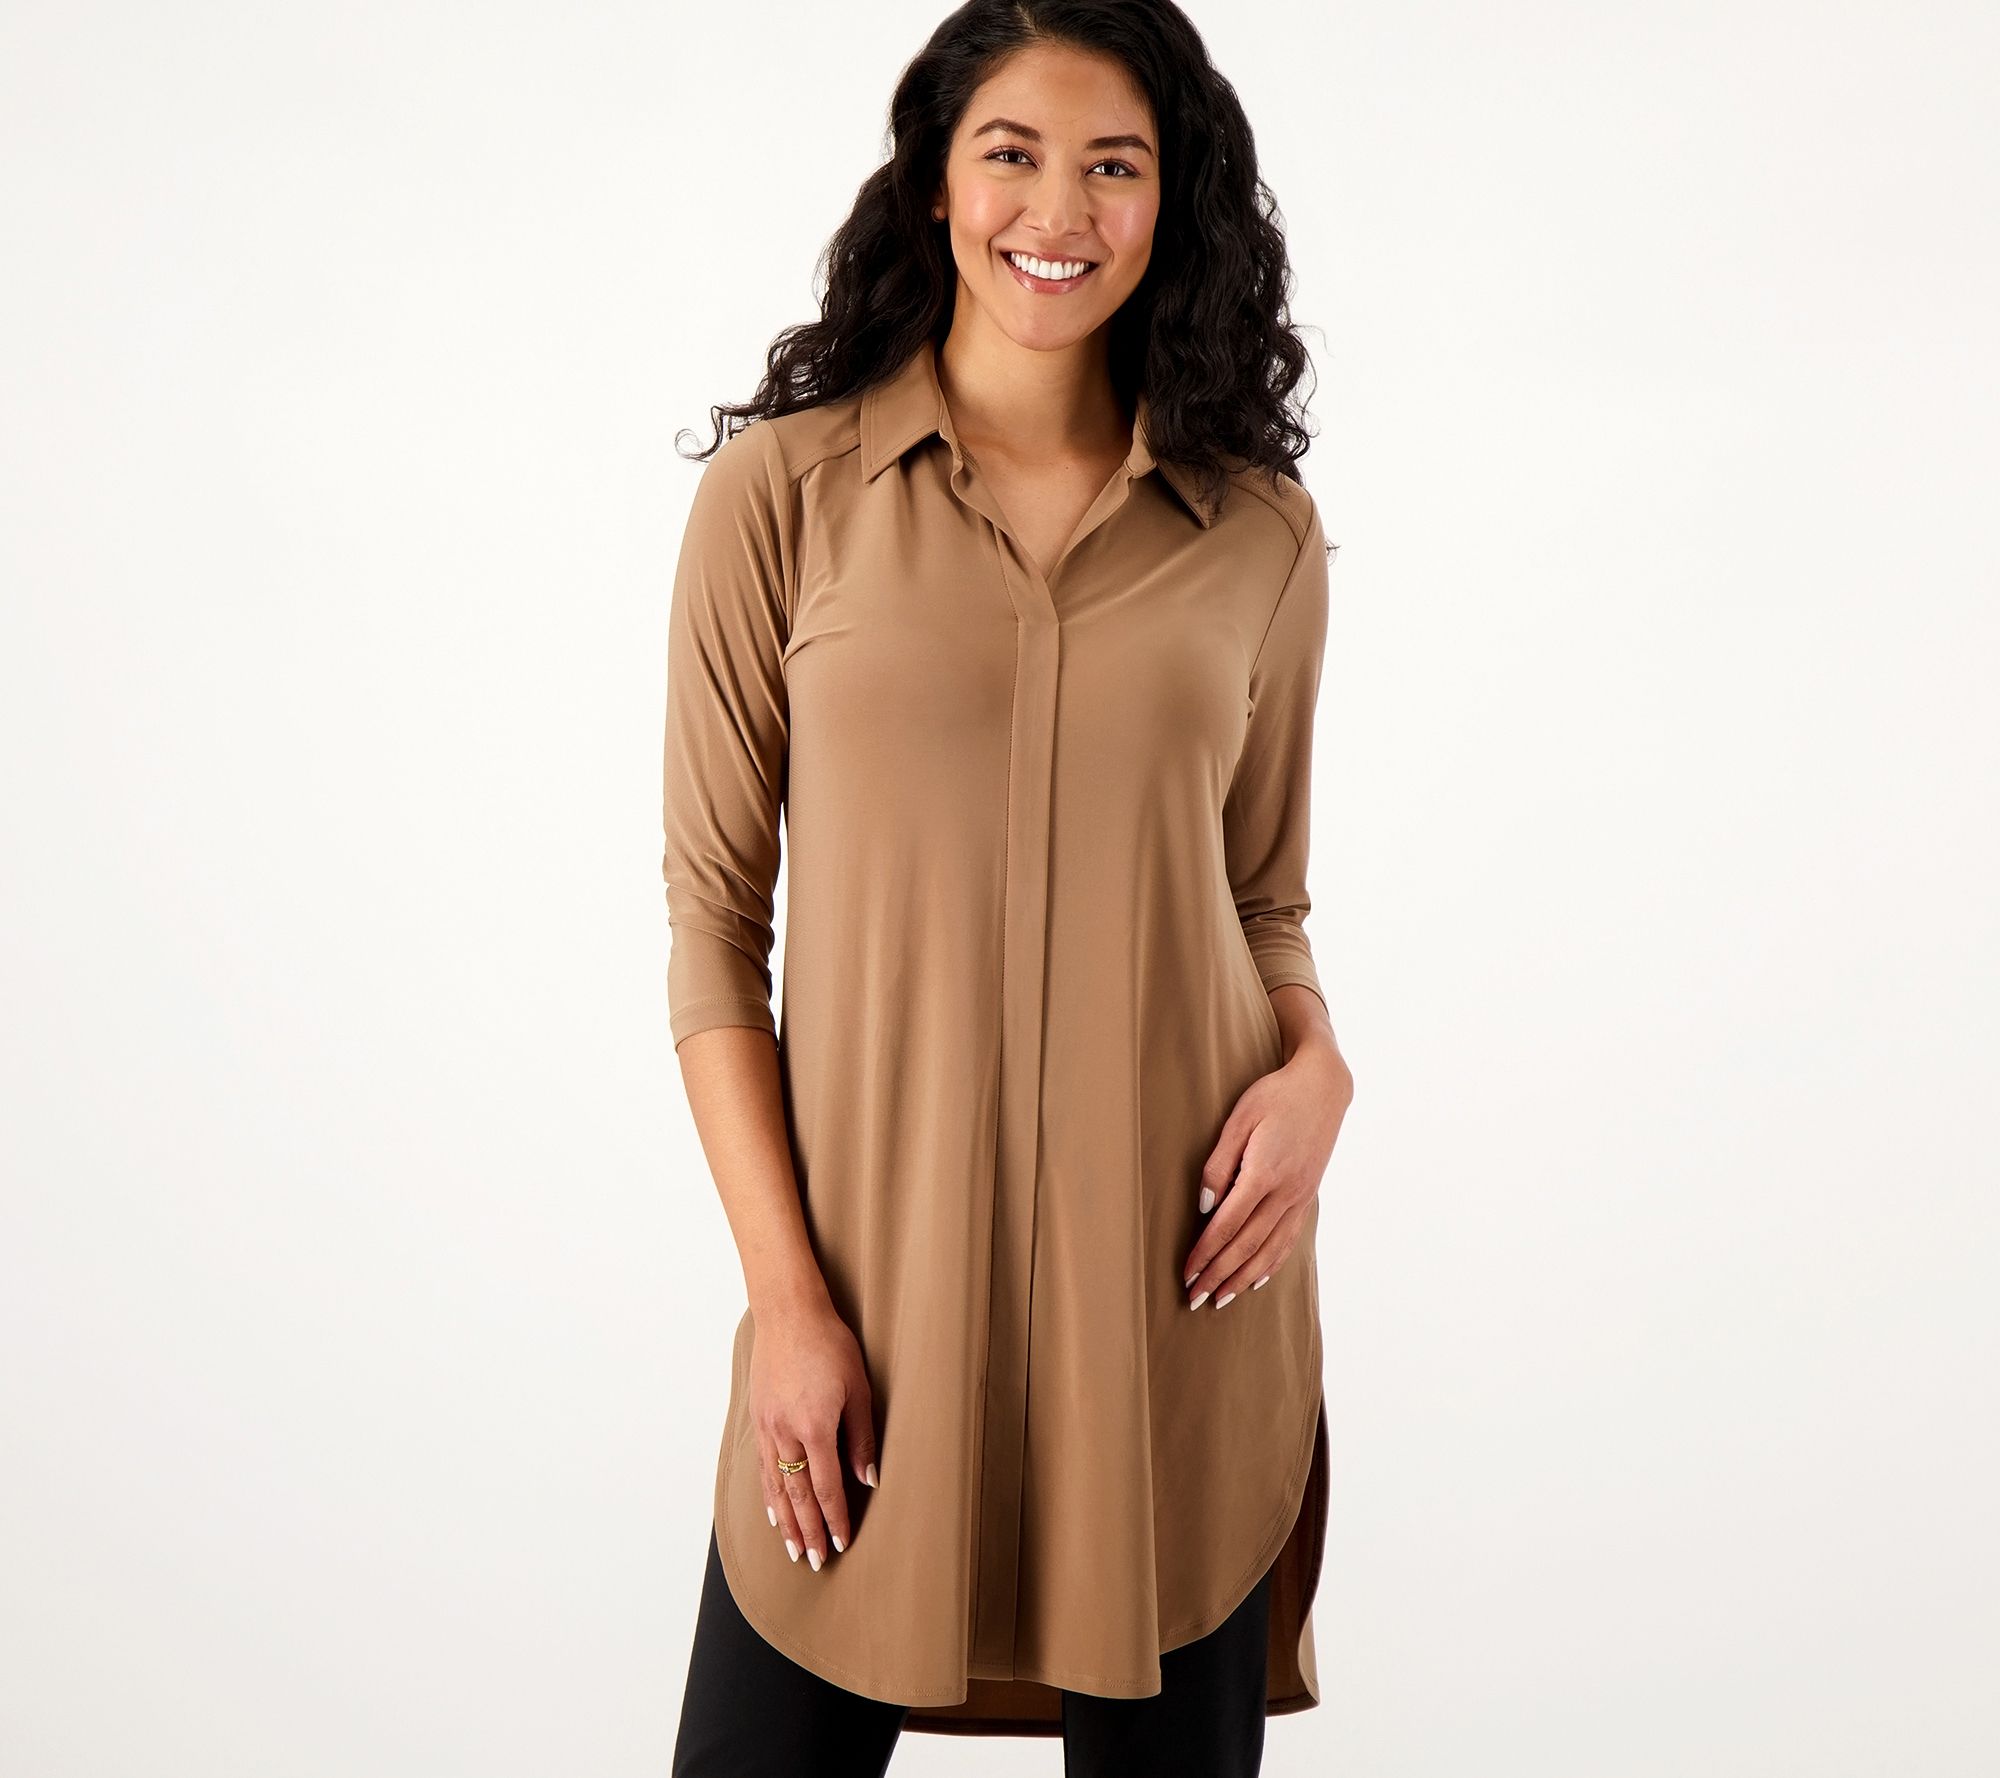 Women with Control Tall Como Jersey Tunic and Cotton Pants 